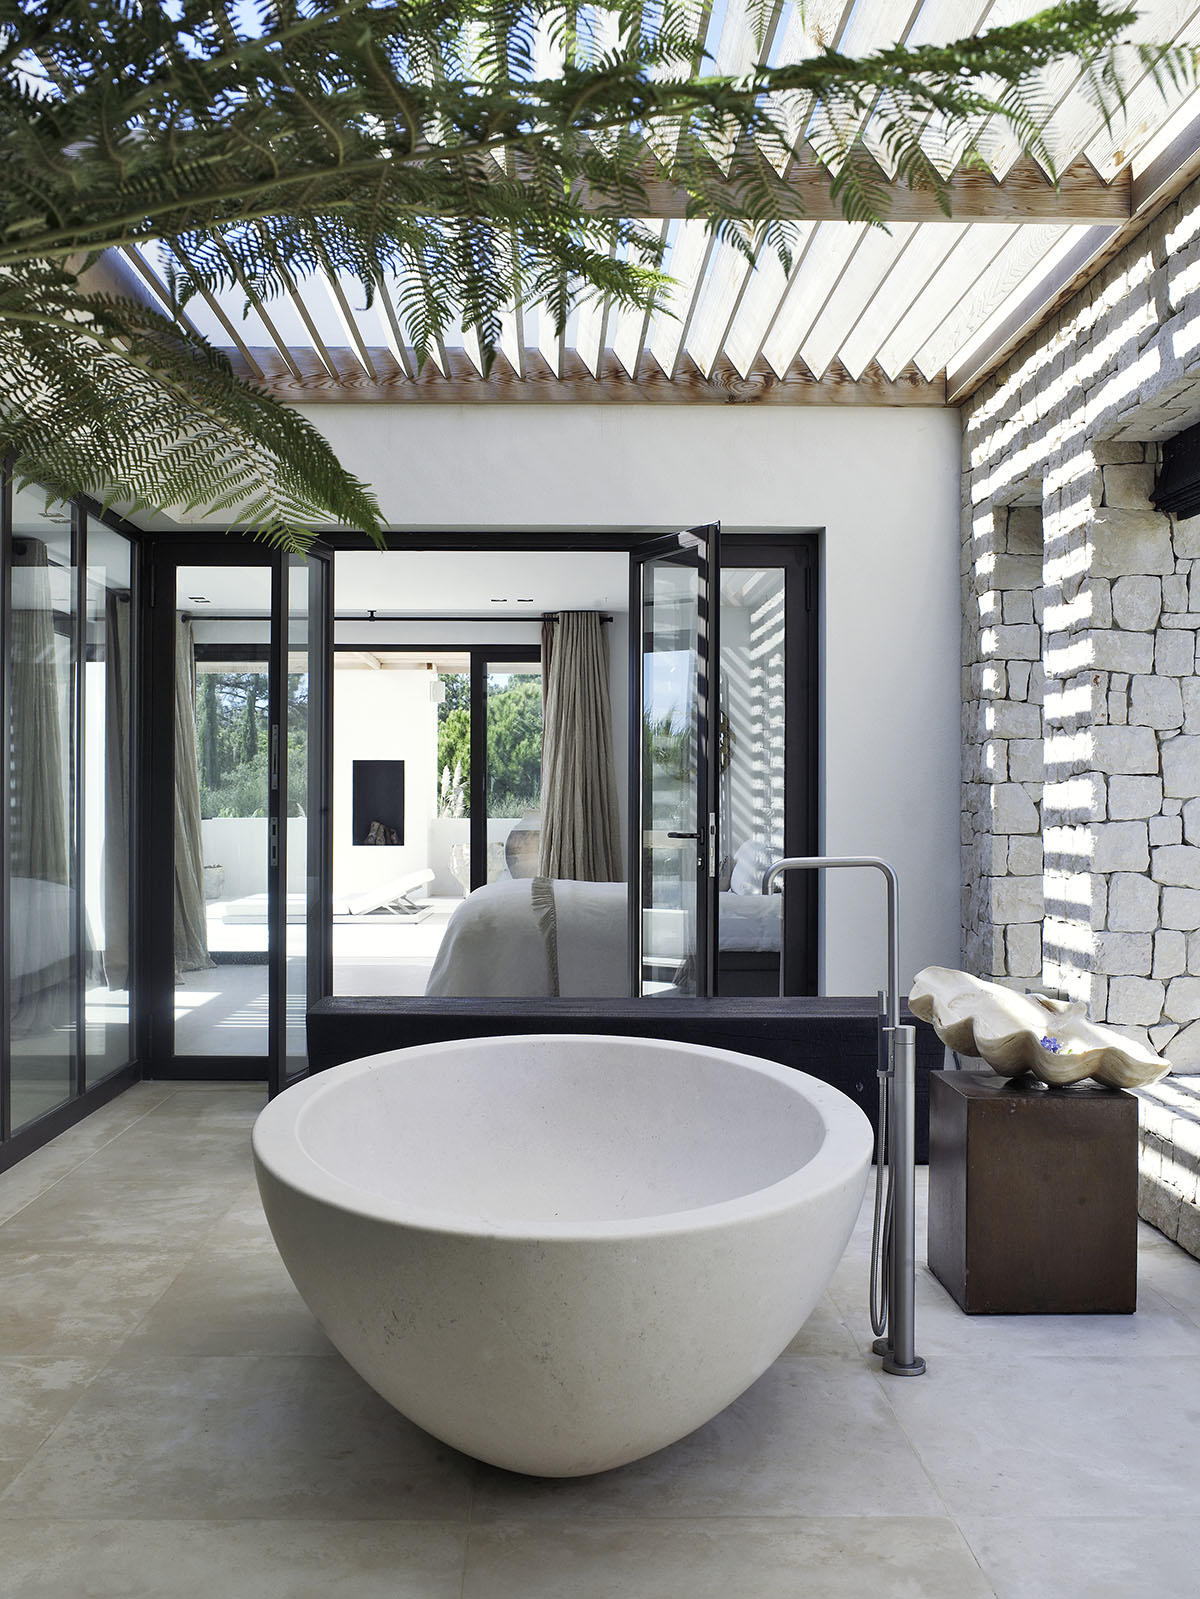 Luxury interior of a bedroom with an outdoor bathtub